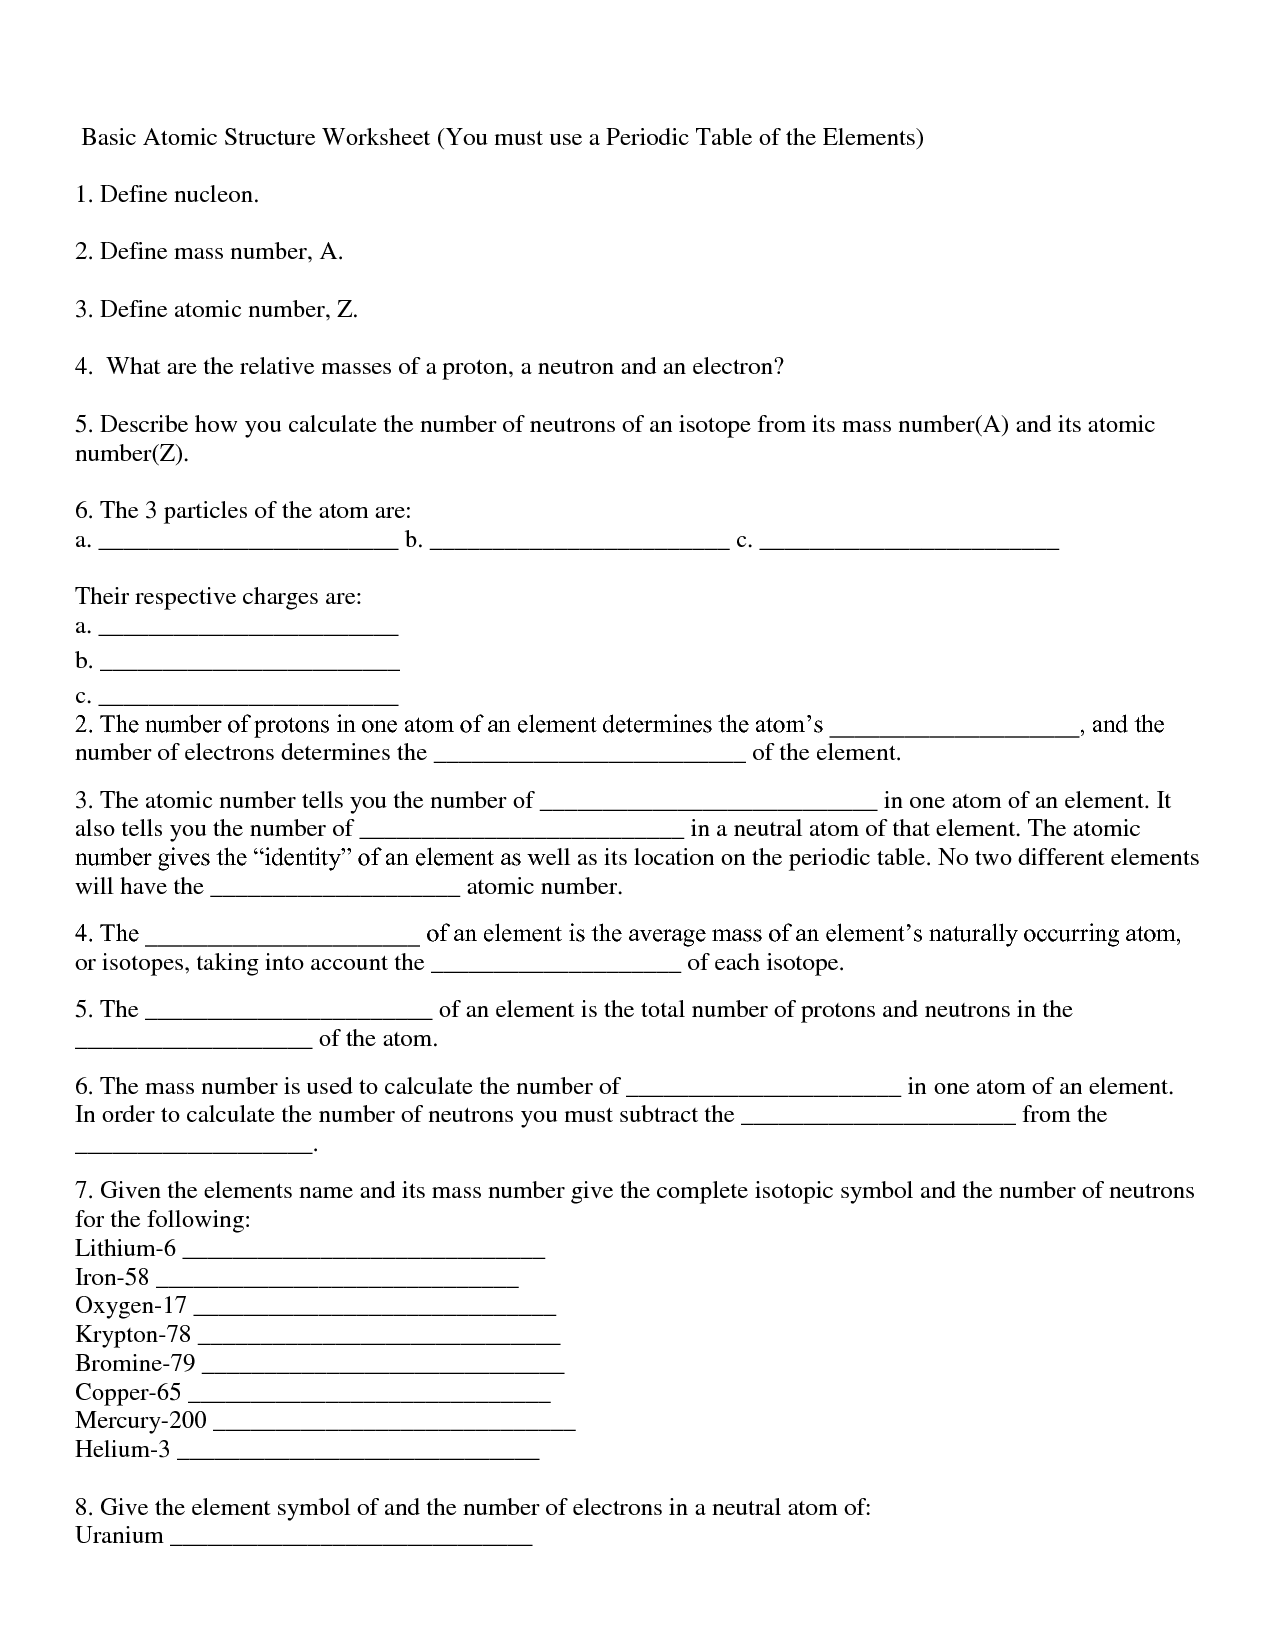 15 Best Images of Atomic Structure Worksheet Answer Key  Periodic Table Worksheet Answer Key 